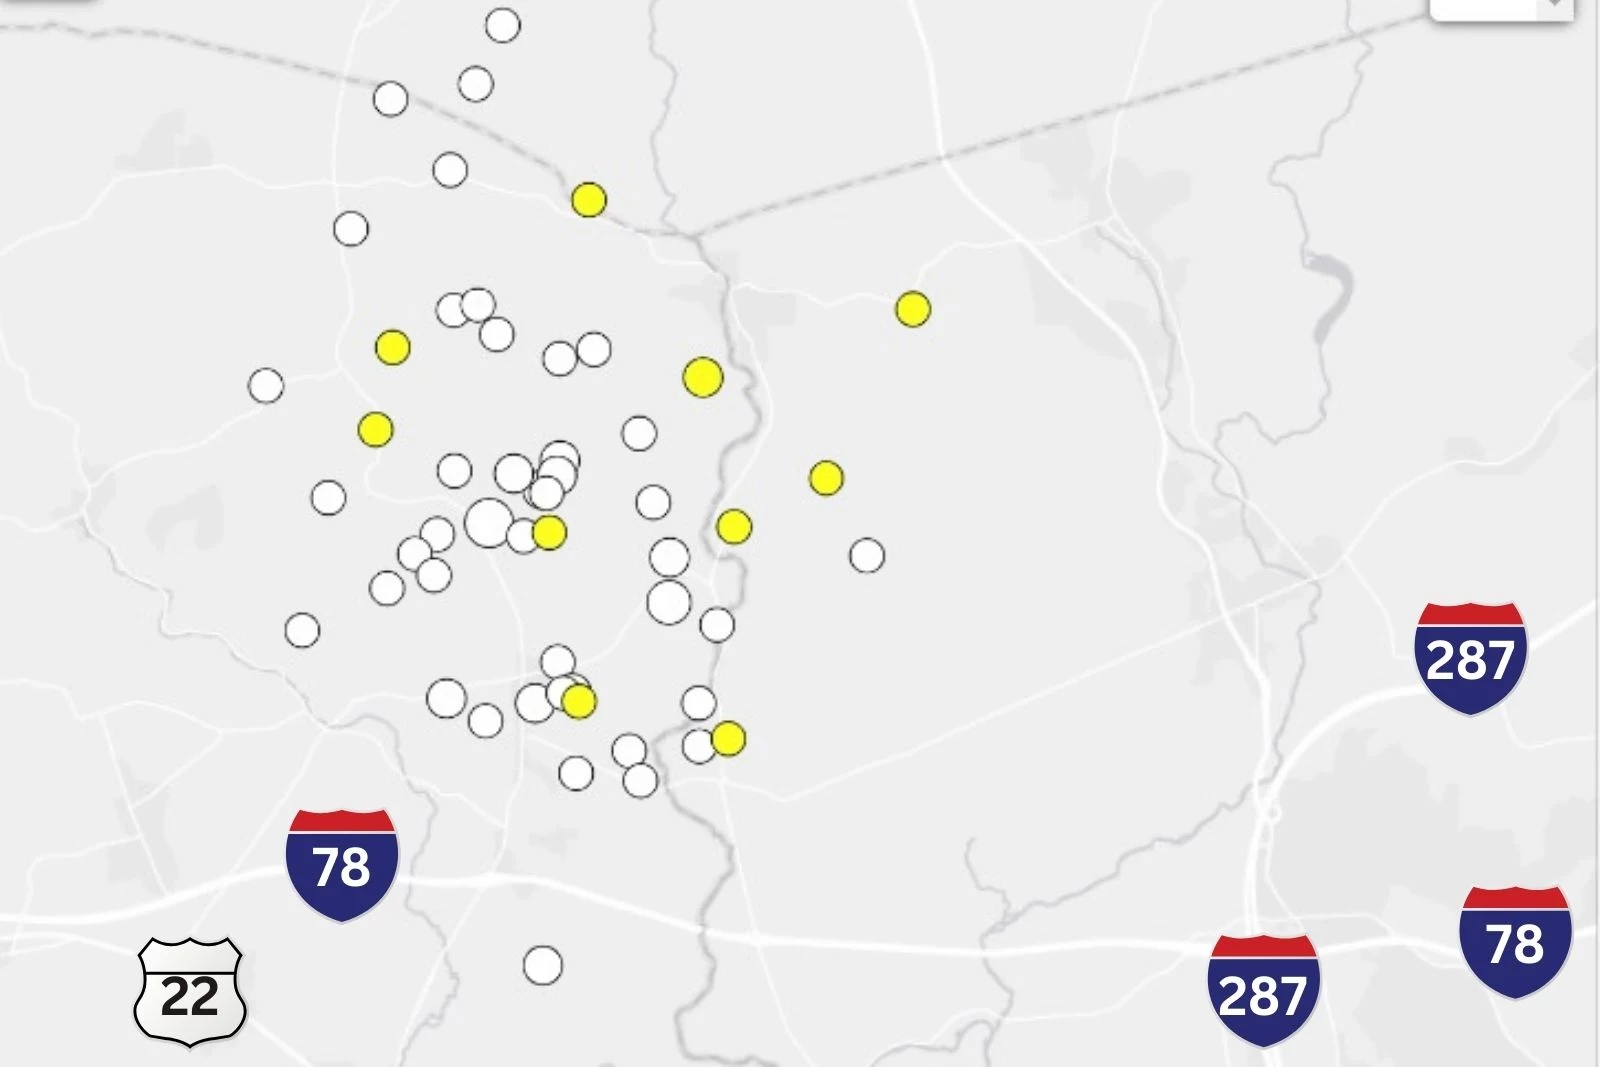 USGS map shows locations of aftershocks following 4/5 earthquake as of 4/15 